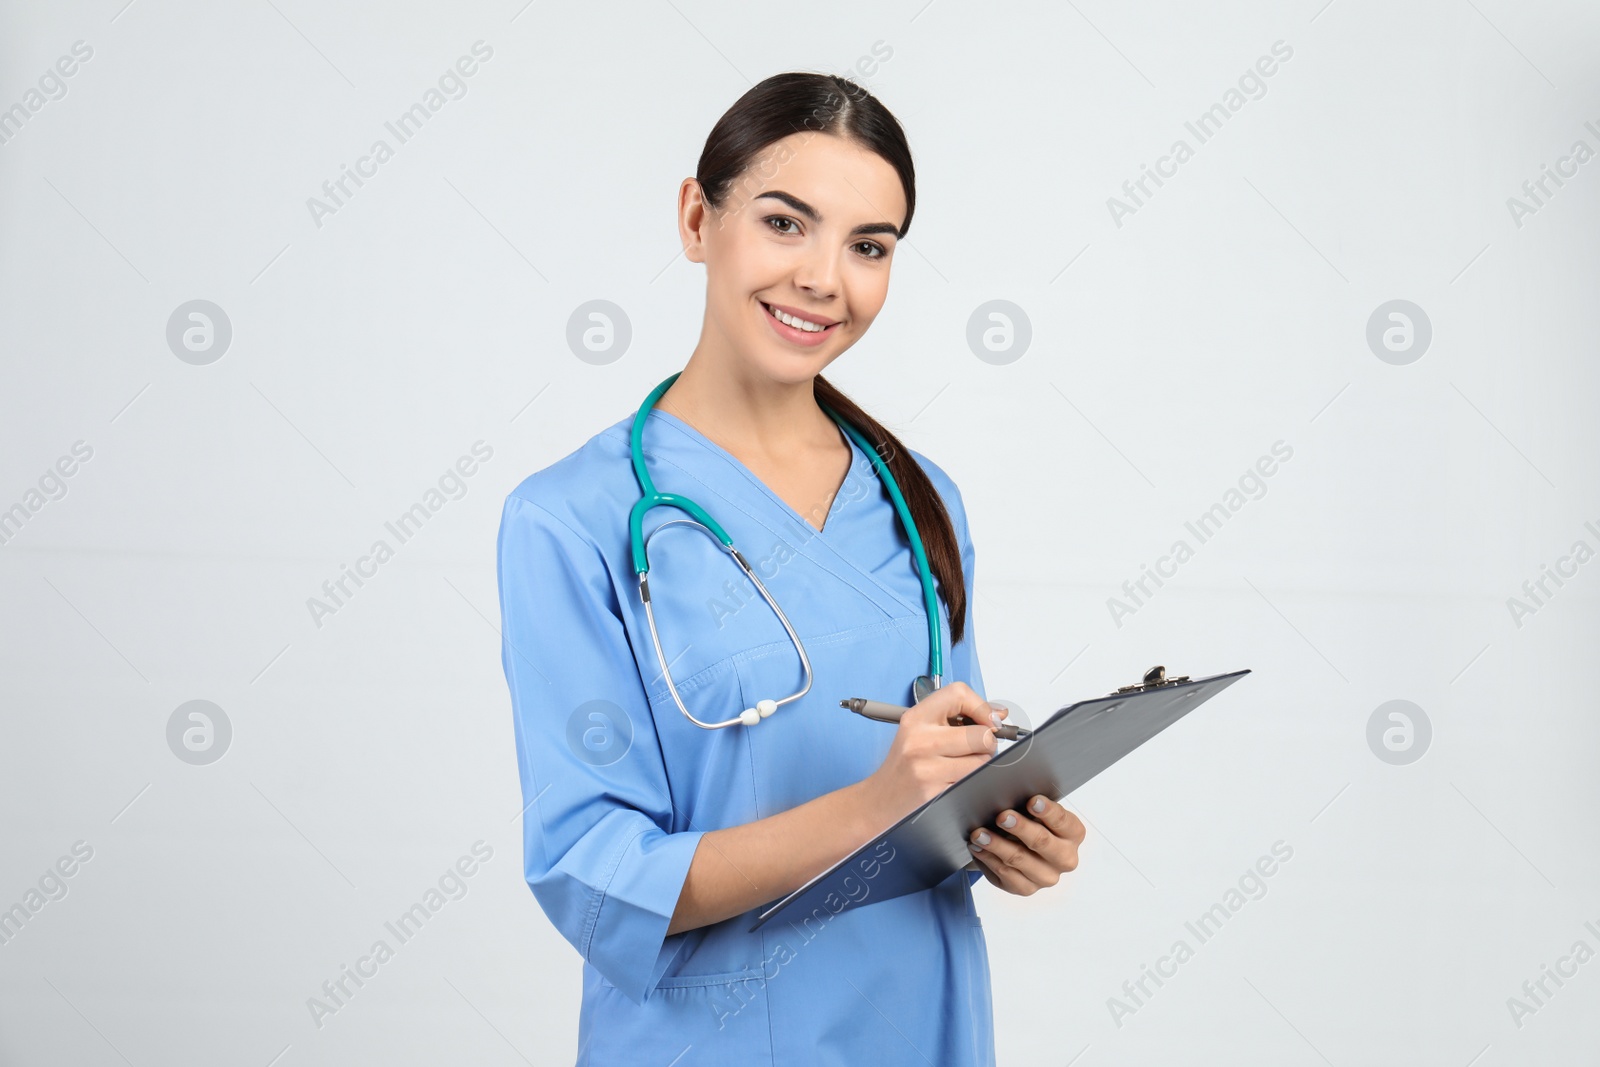 Photo of Portrait of medical assistant with stethoscope and clipboard on light background